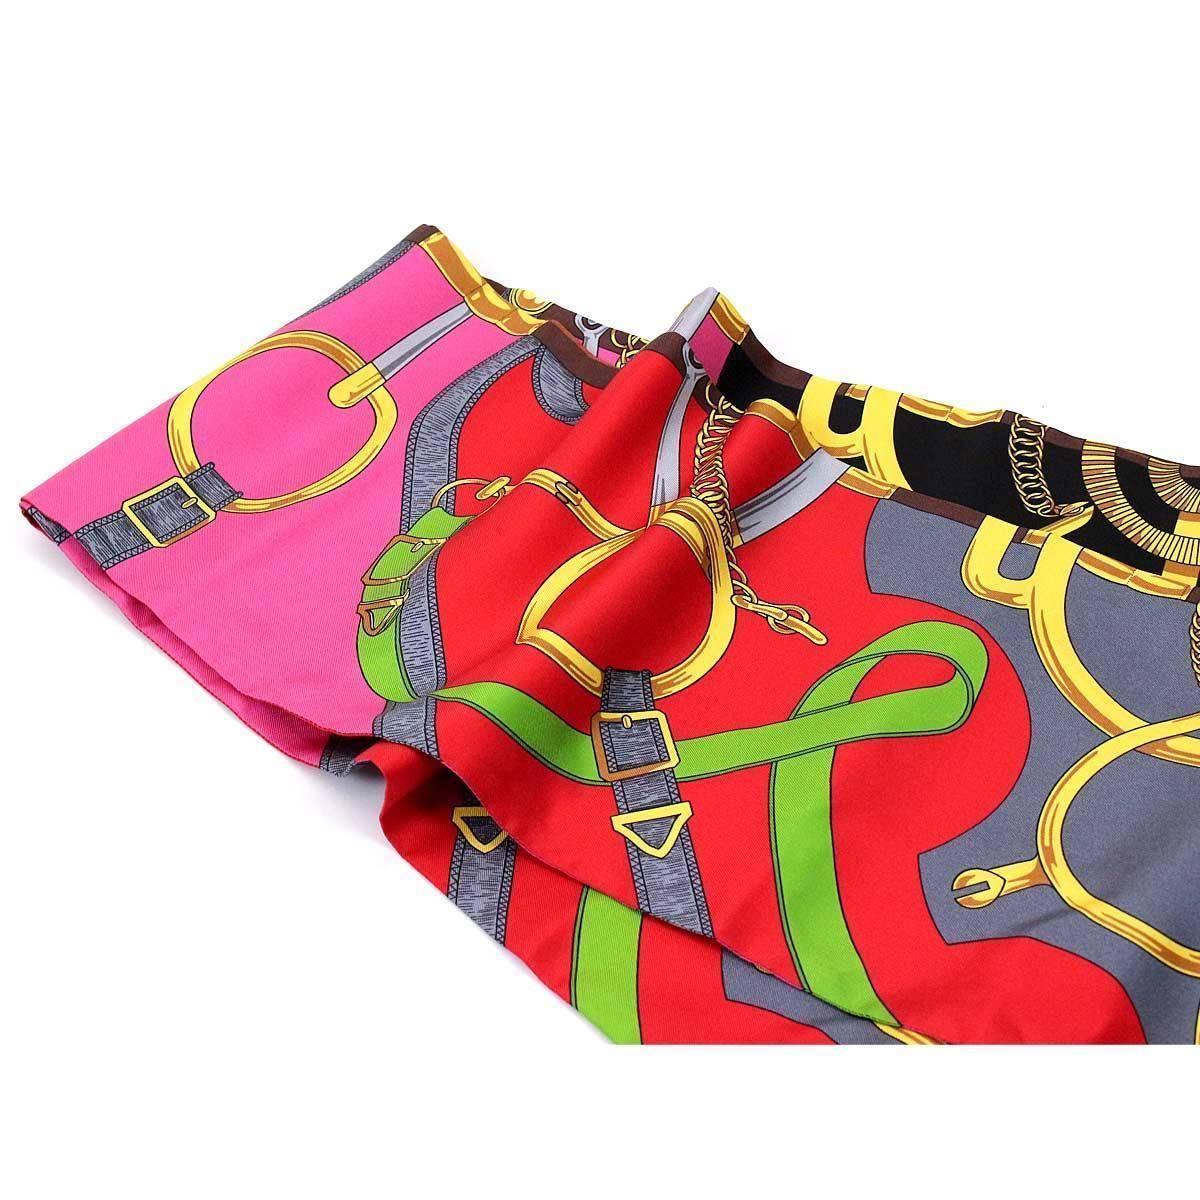 CURATOR'S NOTES

Style Tip: The fashion possibilities are endless with this beautiful Hermes scarf  Wear it as a traditional neck scarf, waist belt, headband, sash and more!  

100% Silk
Made in France
Width 8"
Length 84.5"
Includes